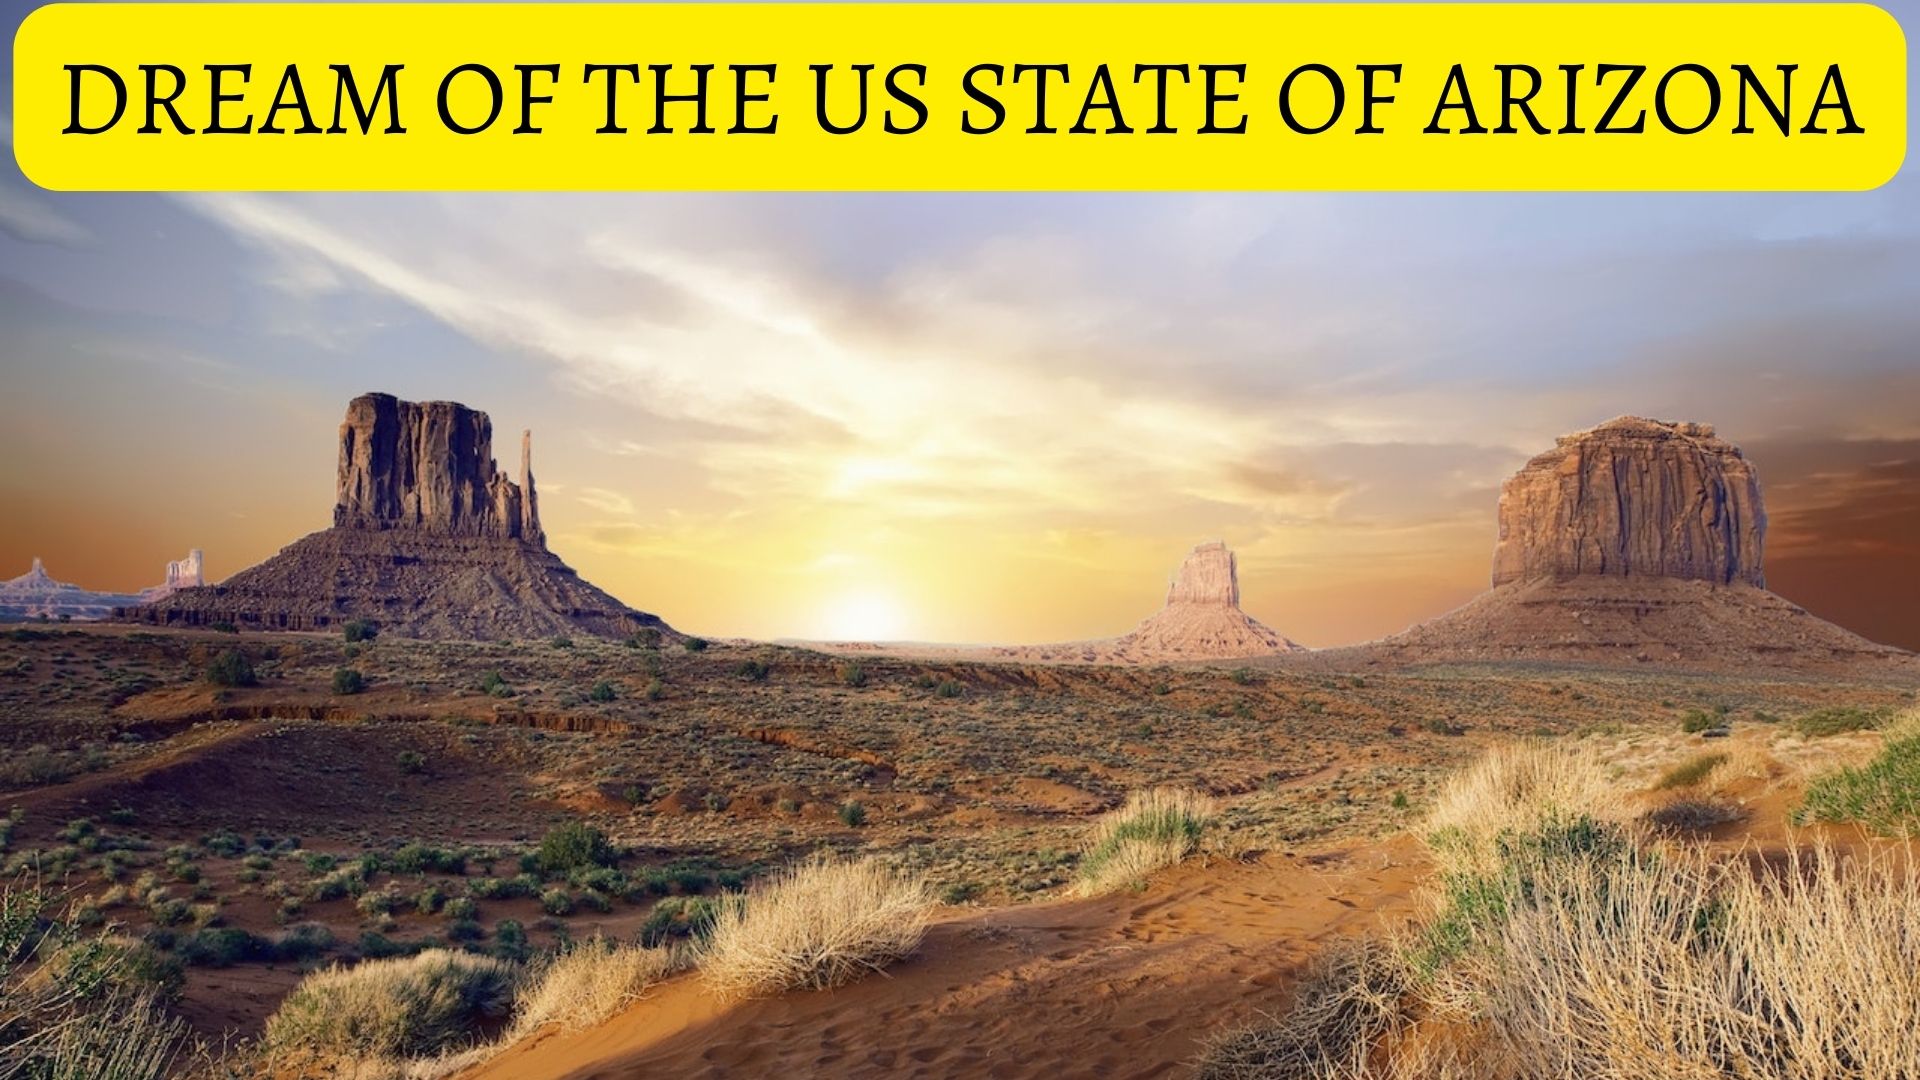 Dream Of The US State Of Arizona - Interpretation And Meaning